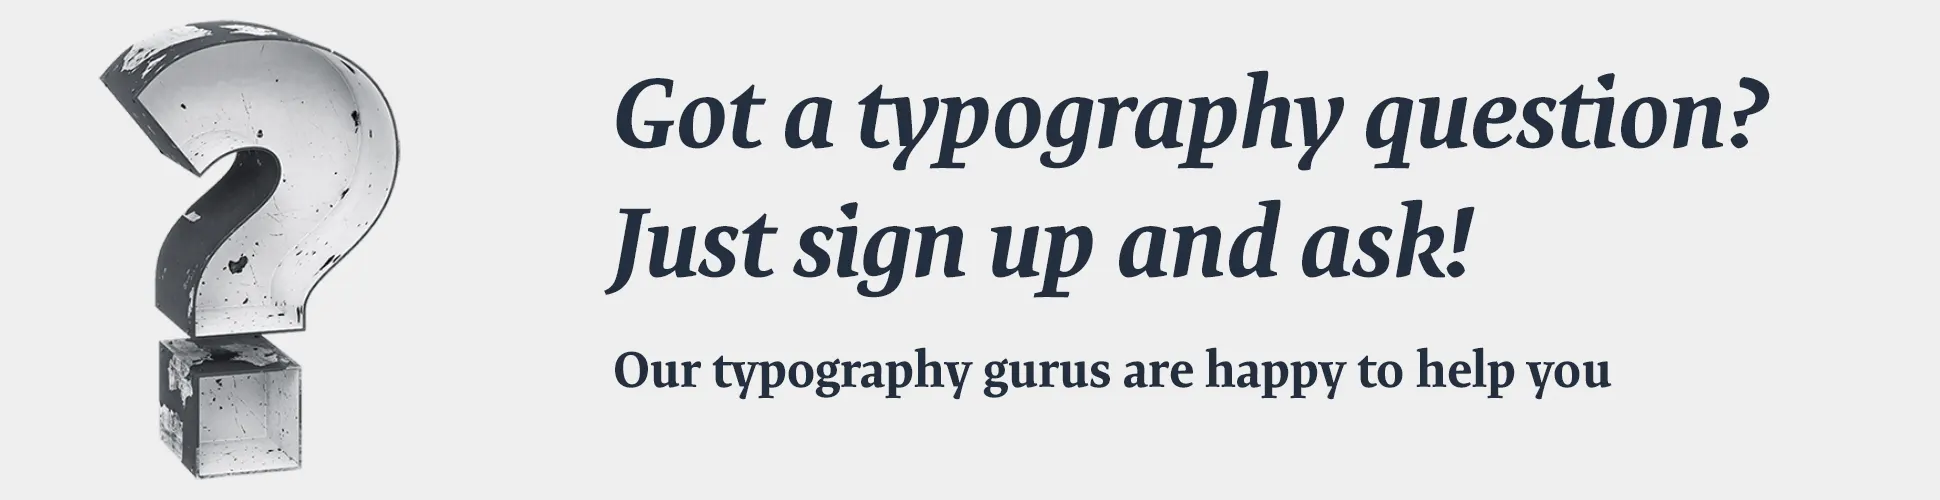 Join our community of friends of typography!